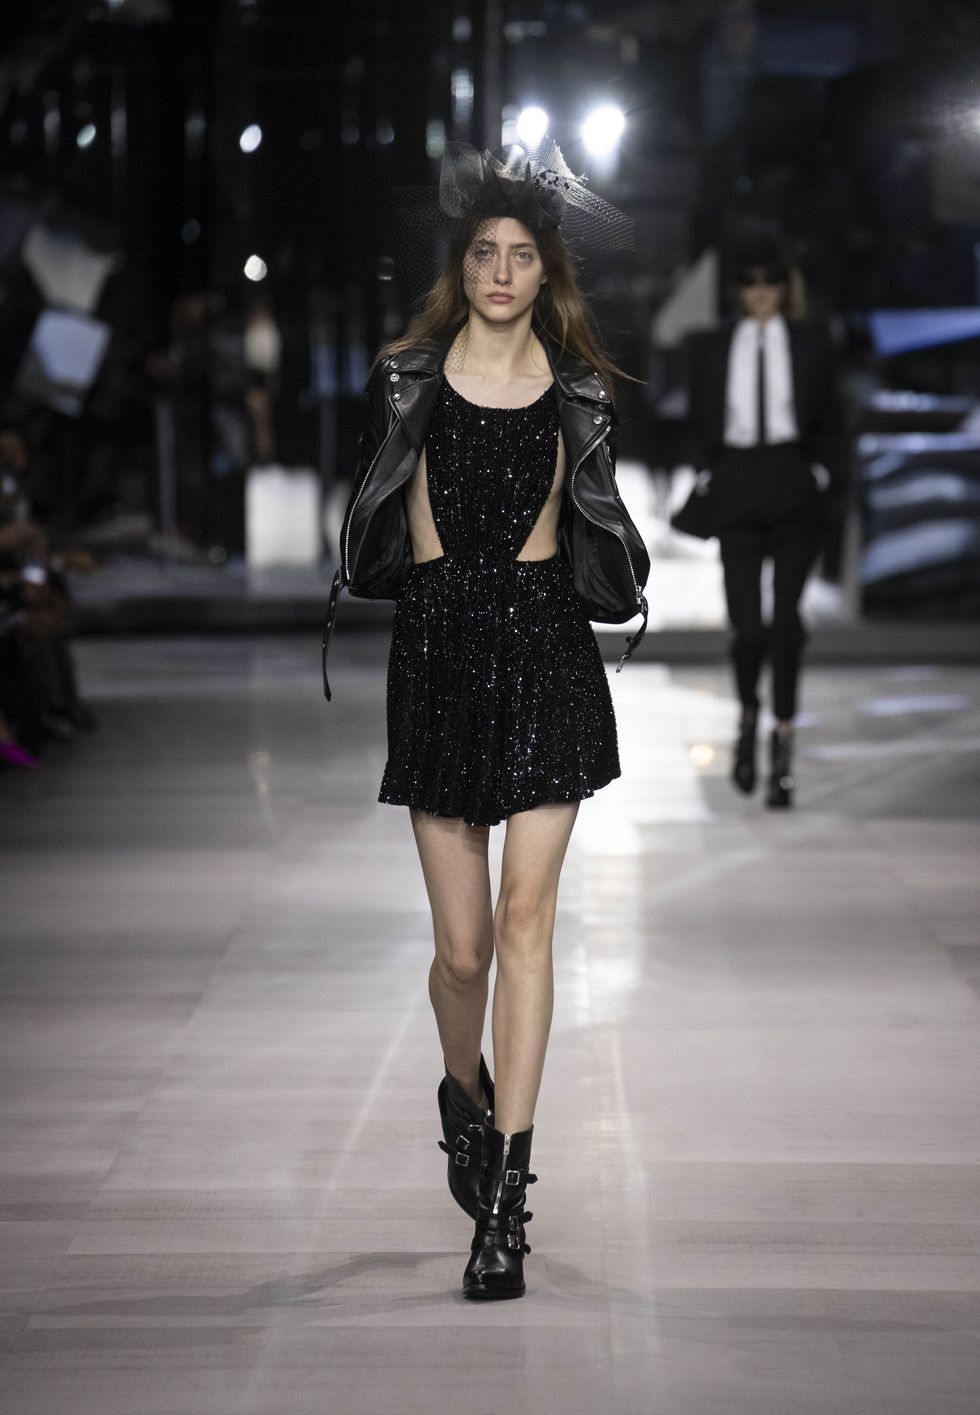 Hedi Slimane’s First Collection for Celine Was More of the Same